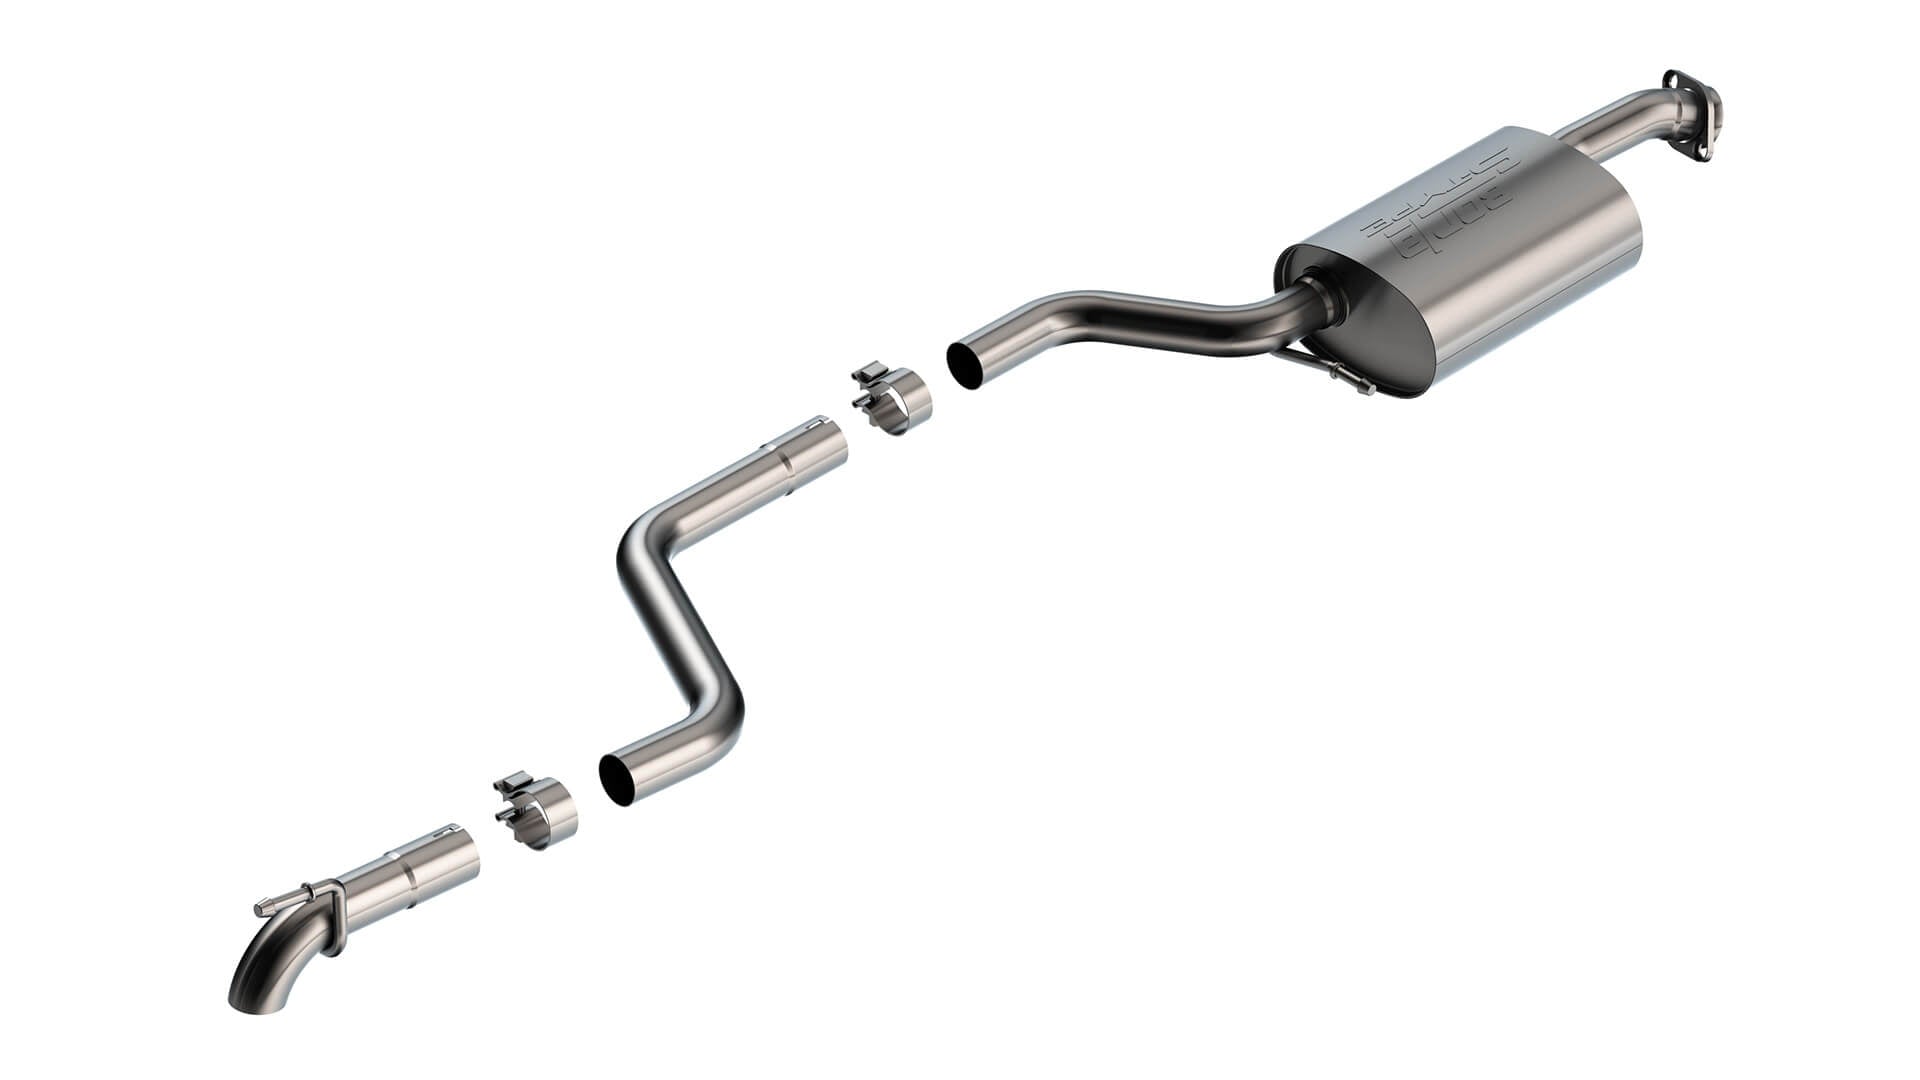 BORLA 140924 Exhaust System Cat-Back S-Type Brushed T-304 Stainless Turn Down for SUZUKI Jimny 2018-2023 Photo-1 